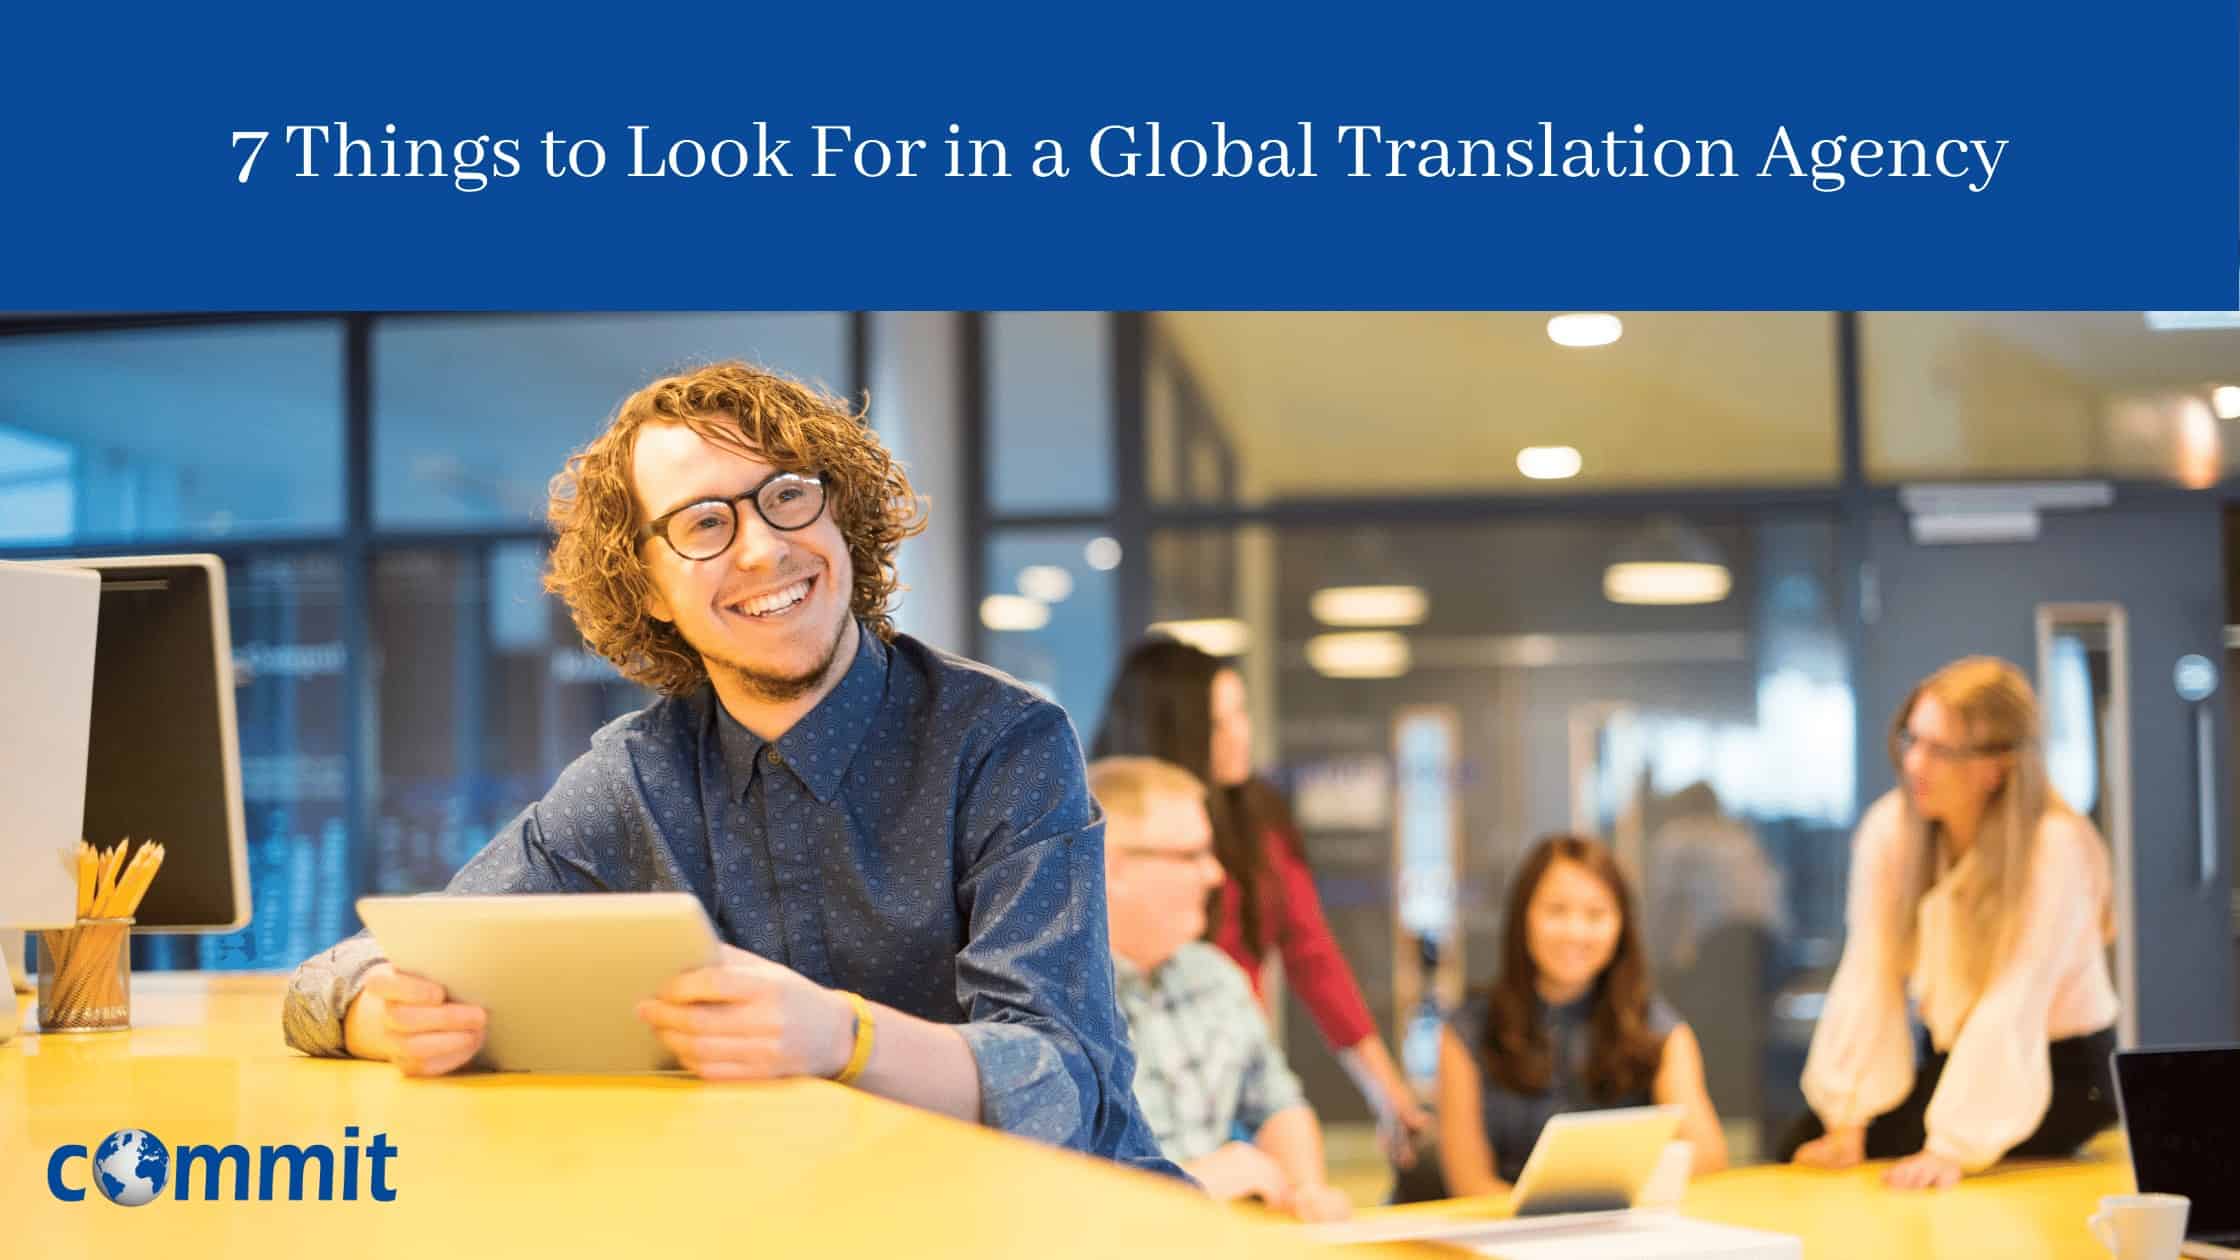 7 Things to Look For in a Global Translation Agency